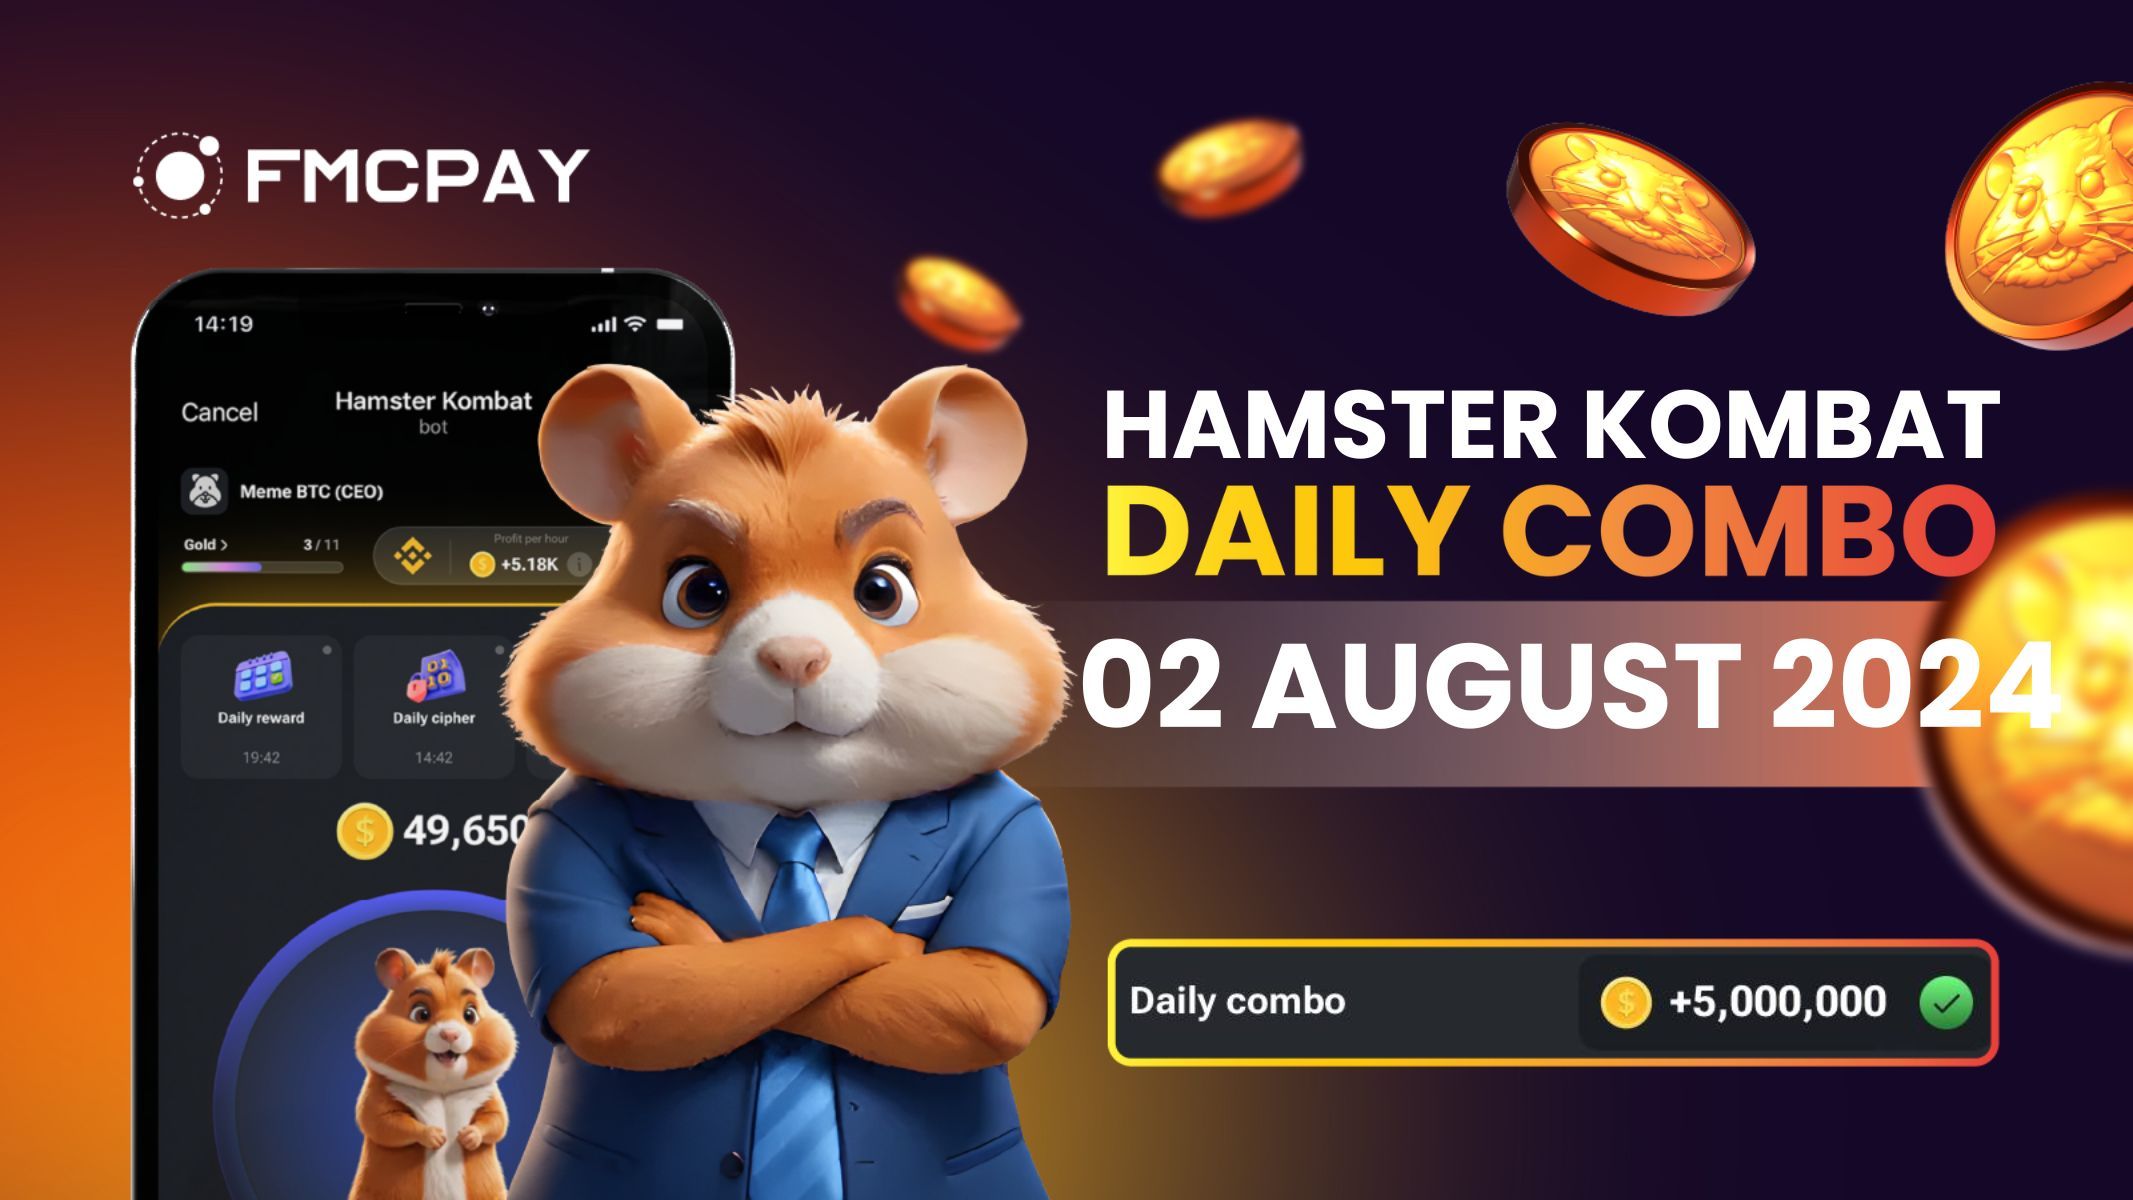 fmcpay-hamster-kombat-daily-combo-august-2nd-claim-5m-coins